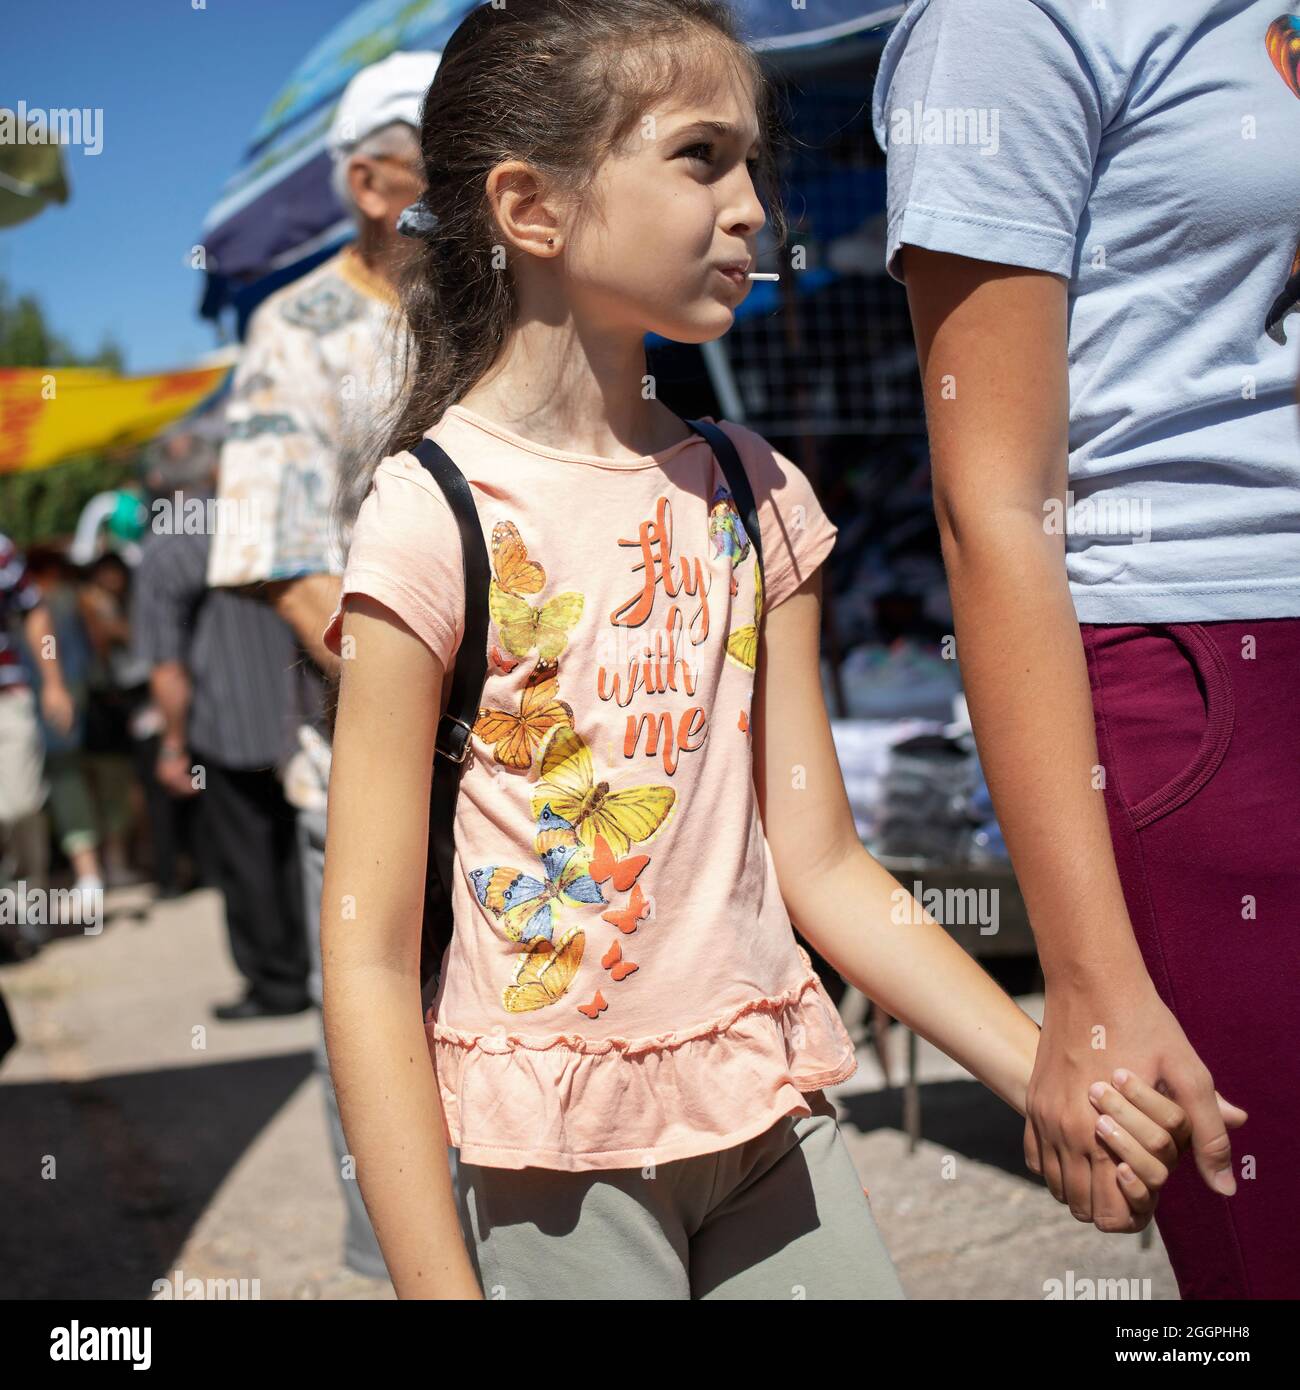 Sokobanja, Serbia, Aug 19, 2021: Portrait of a girl with a lollipop touring a village fair with mom Stock Photo